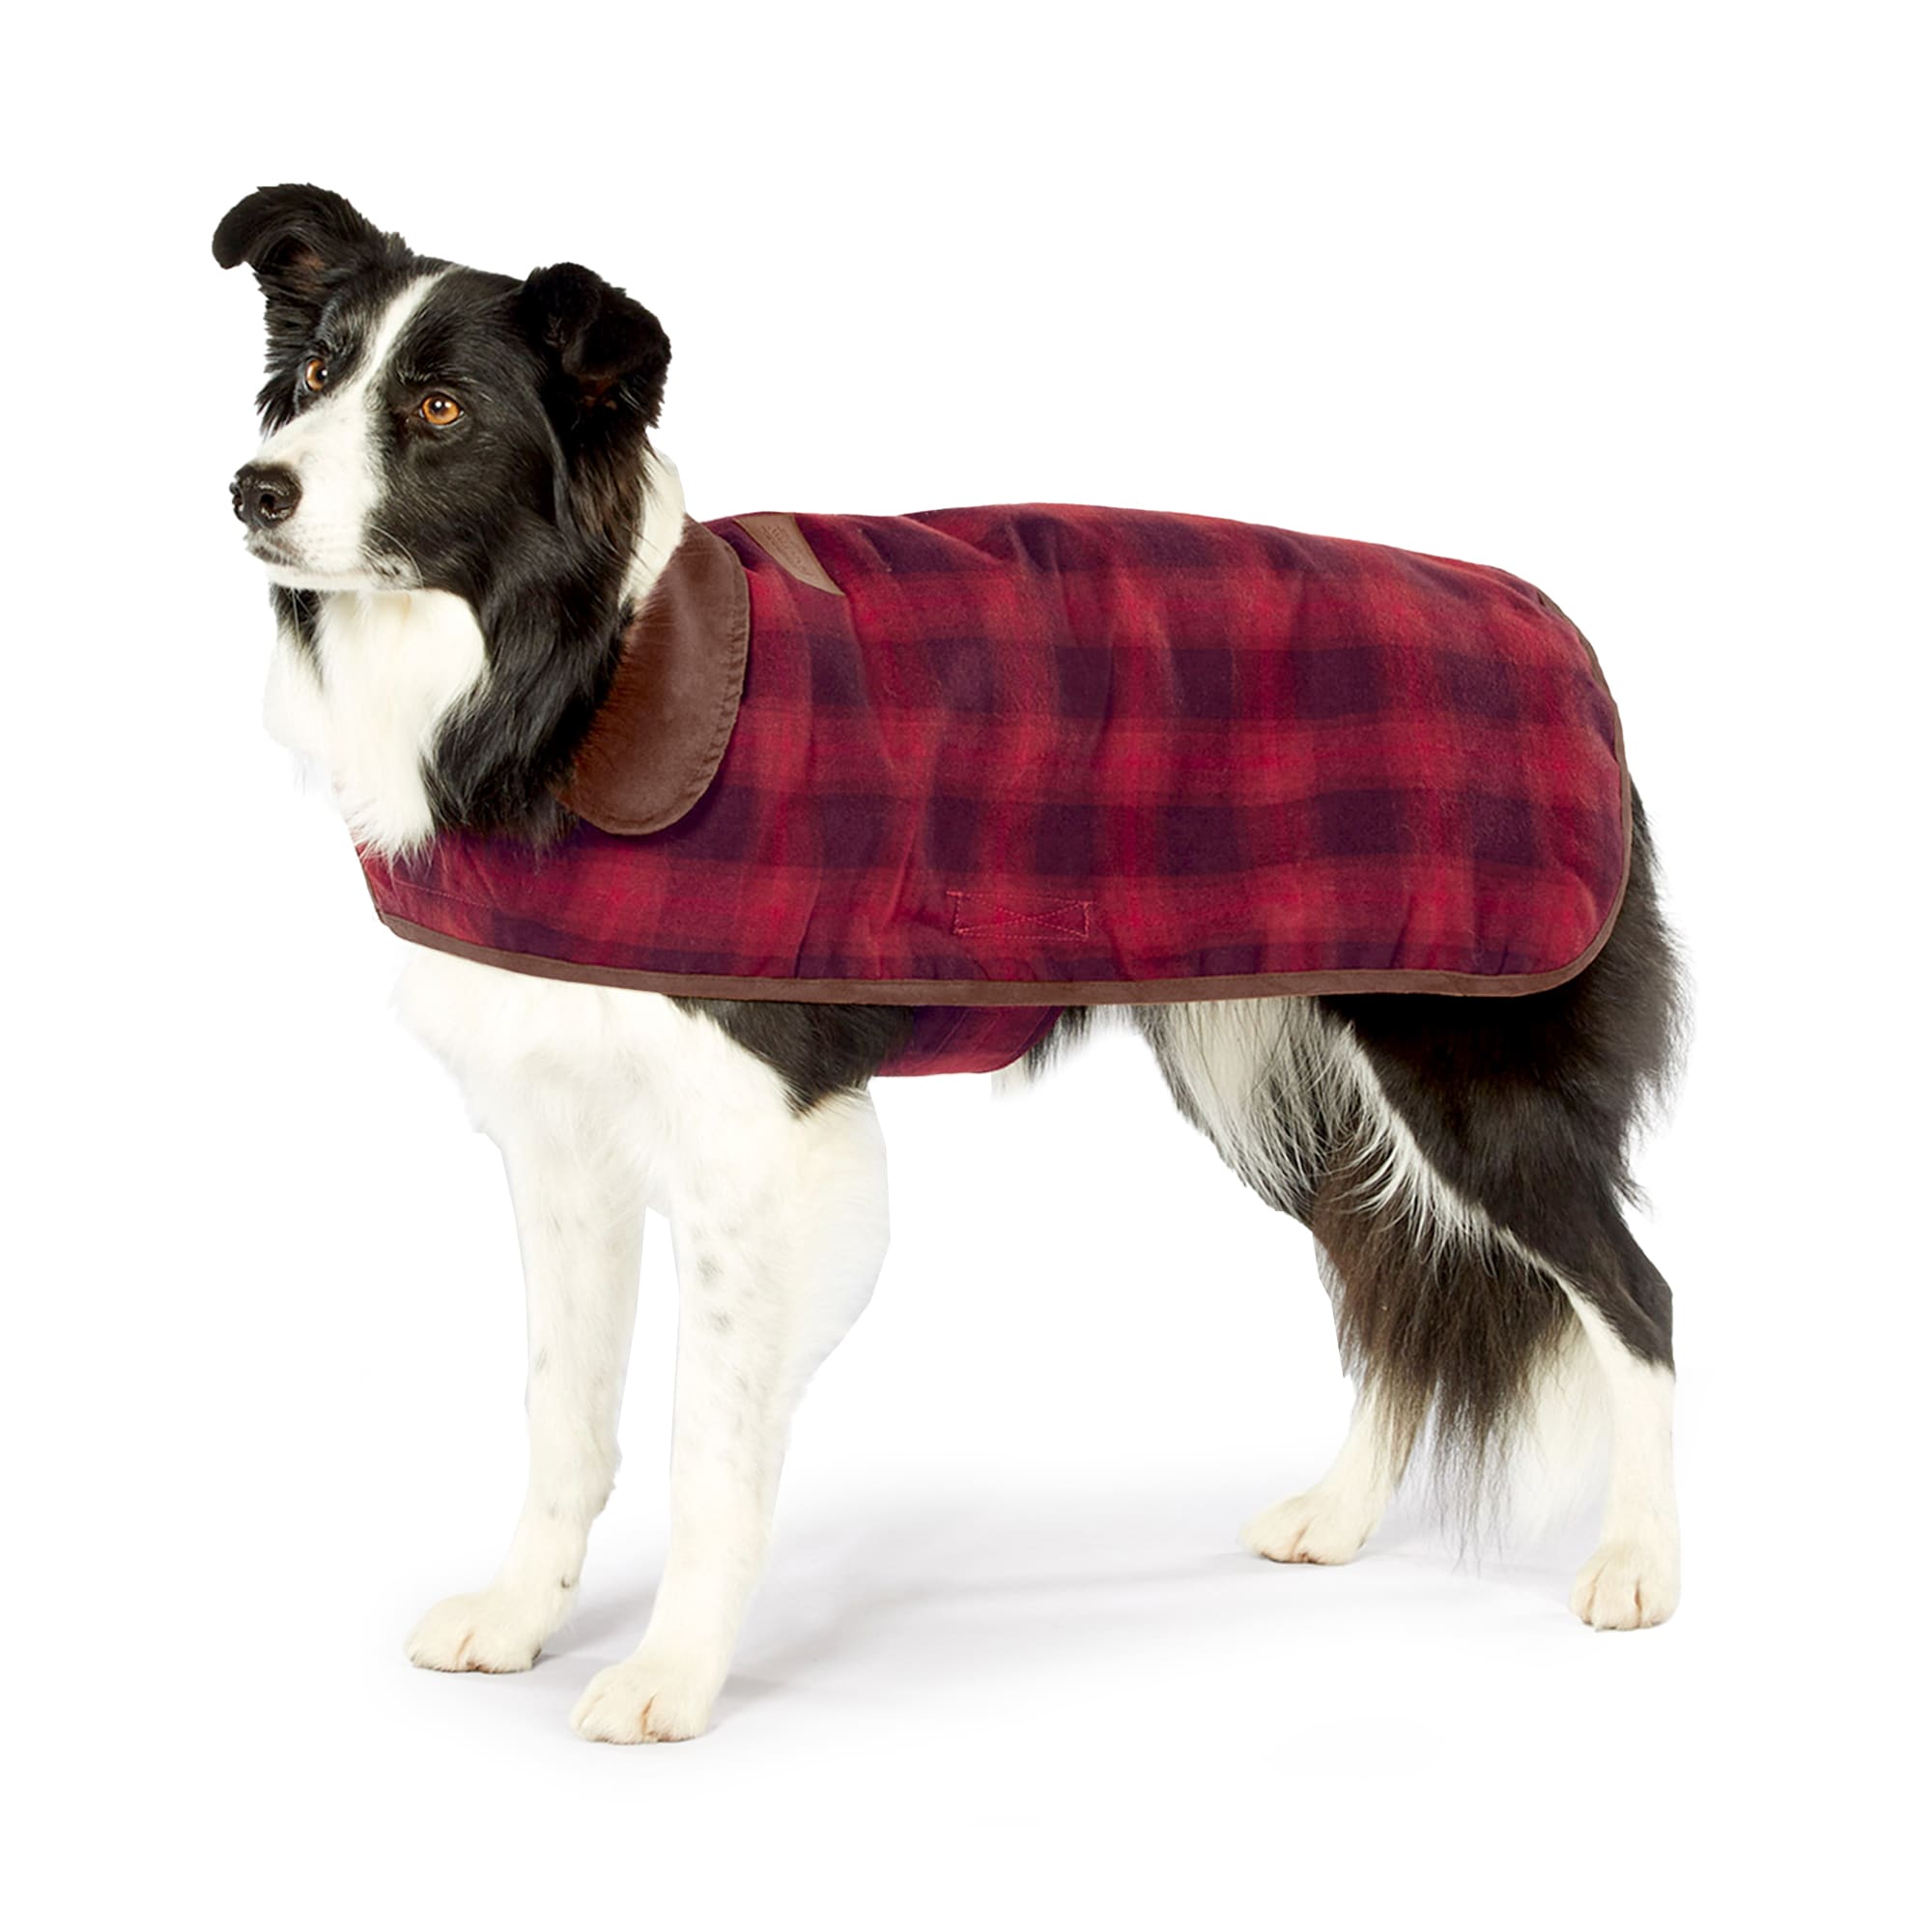 Photos - Dog Food Pendleton Red Ombre Plaid Dog Coat, Medium, Red 0PP3003-RED 